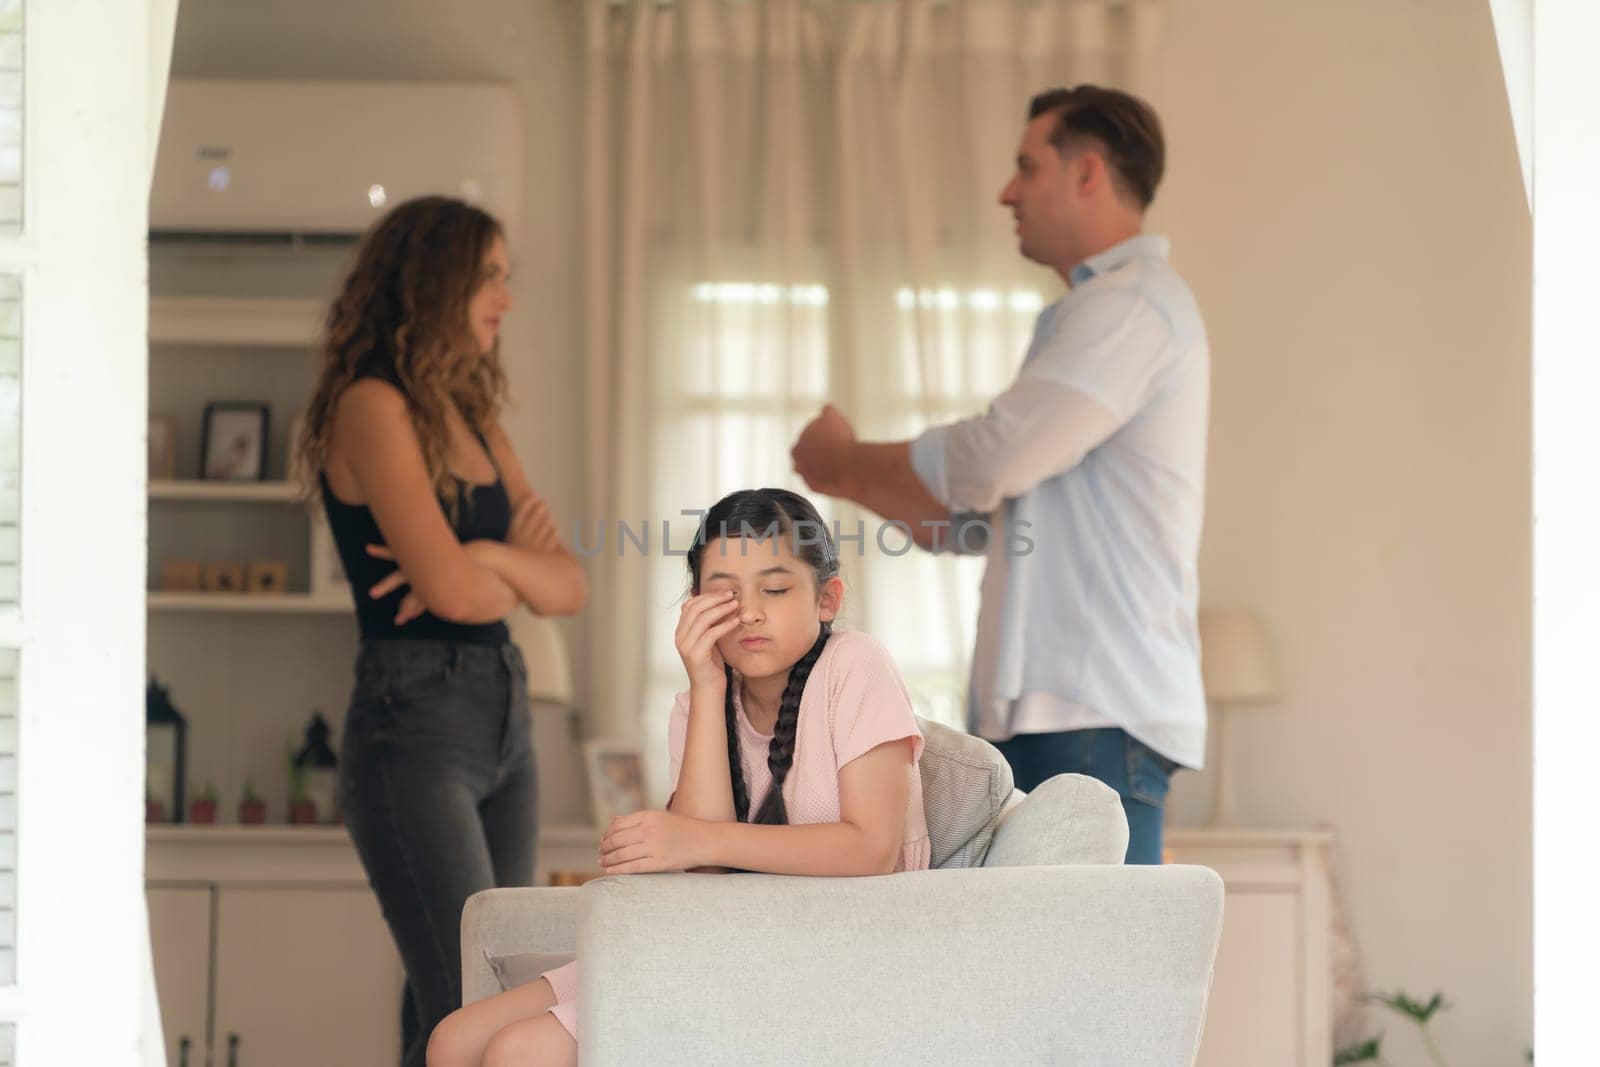 Annoyed and unhappy young girl sitting on sofa trapped in middle of tension by her parent argument in living room. Unhealthy domestic lifestyle and traumatic childhood develop to depression.Synchronos